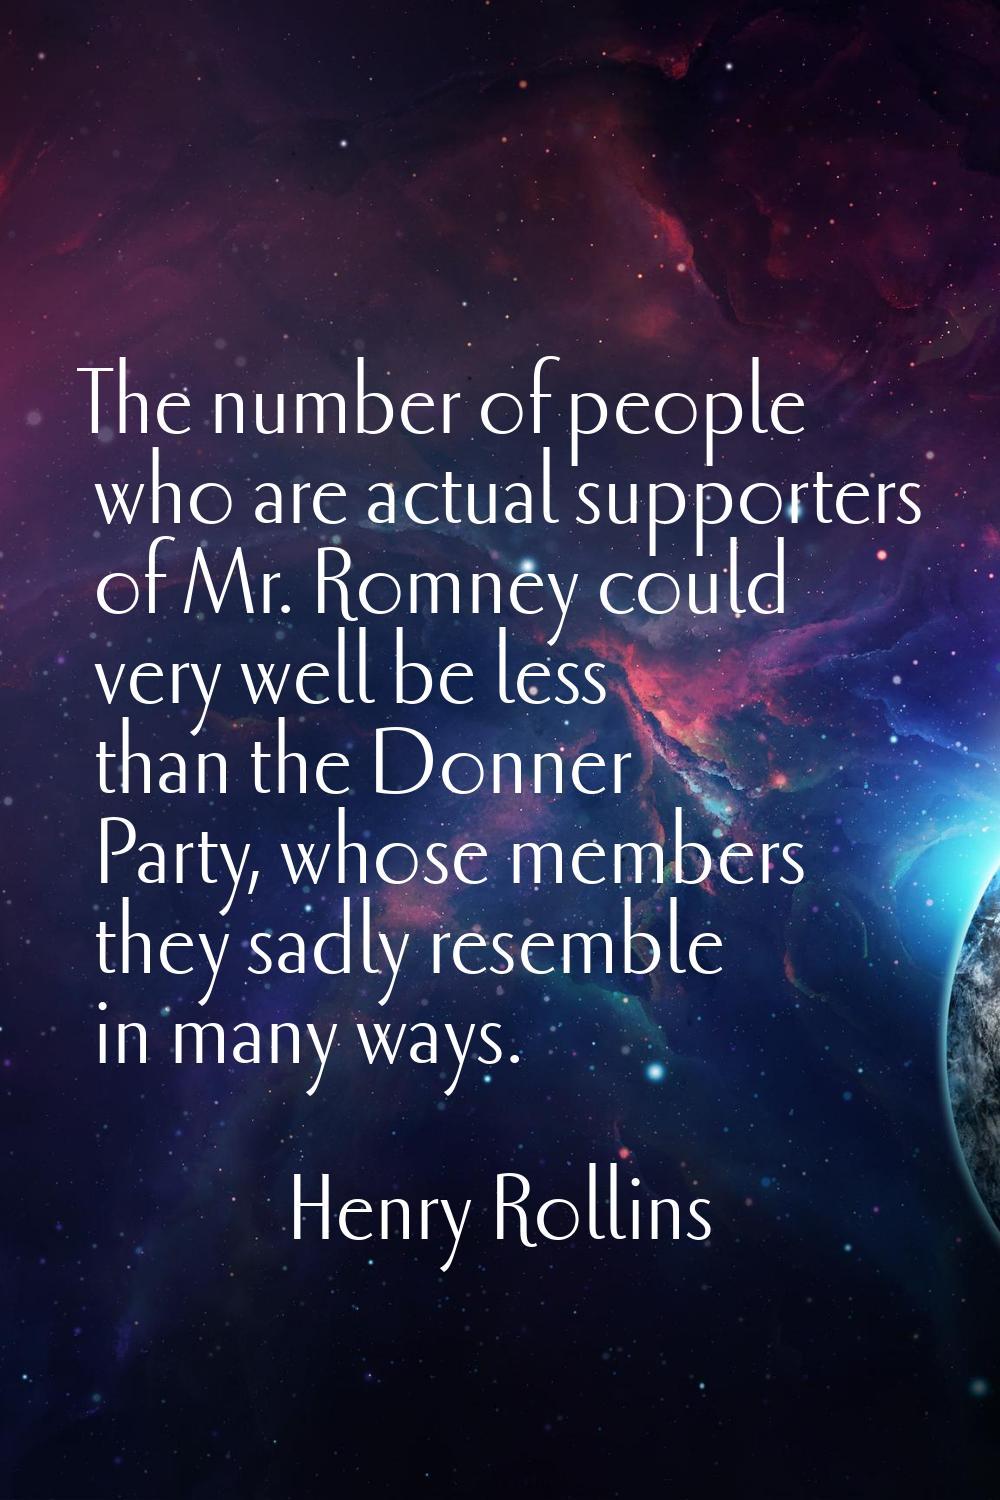 The number of people who are actual supporters of Mr. Romney could very well be less than the Donne